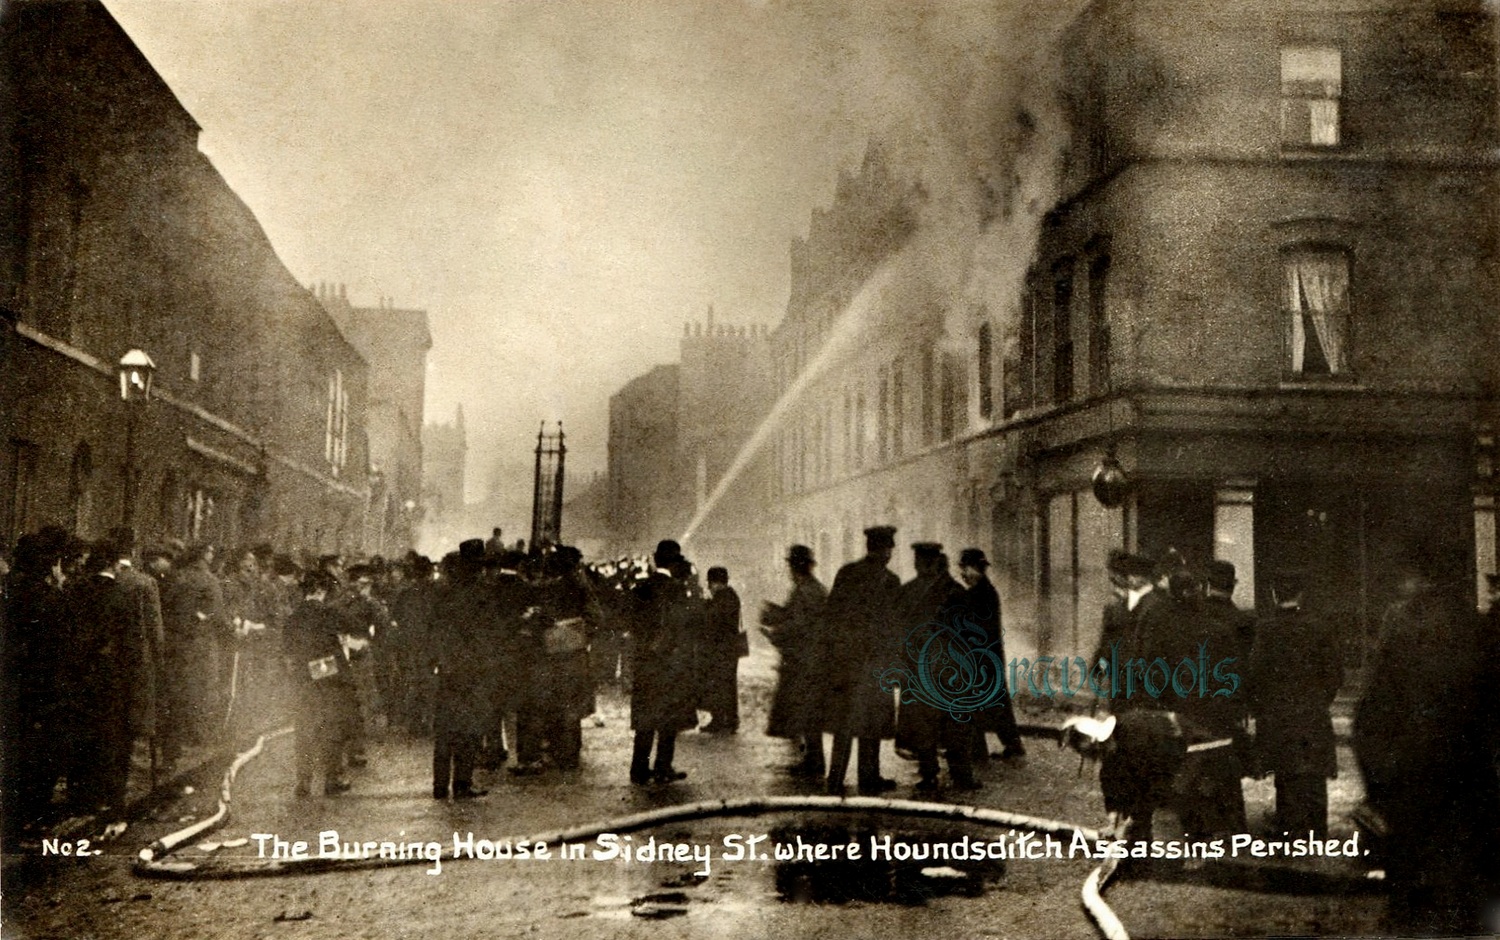  old photos of Siege of Stepney, London,  - click image below to return